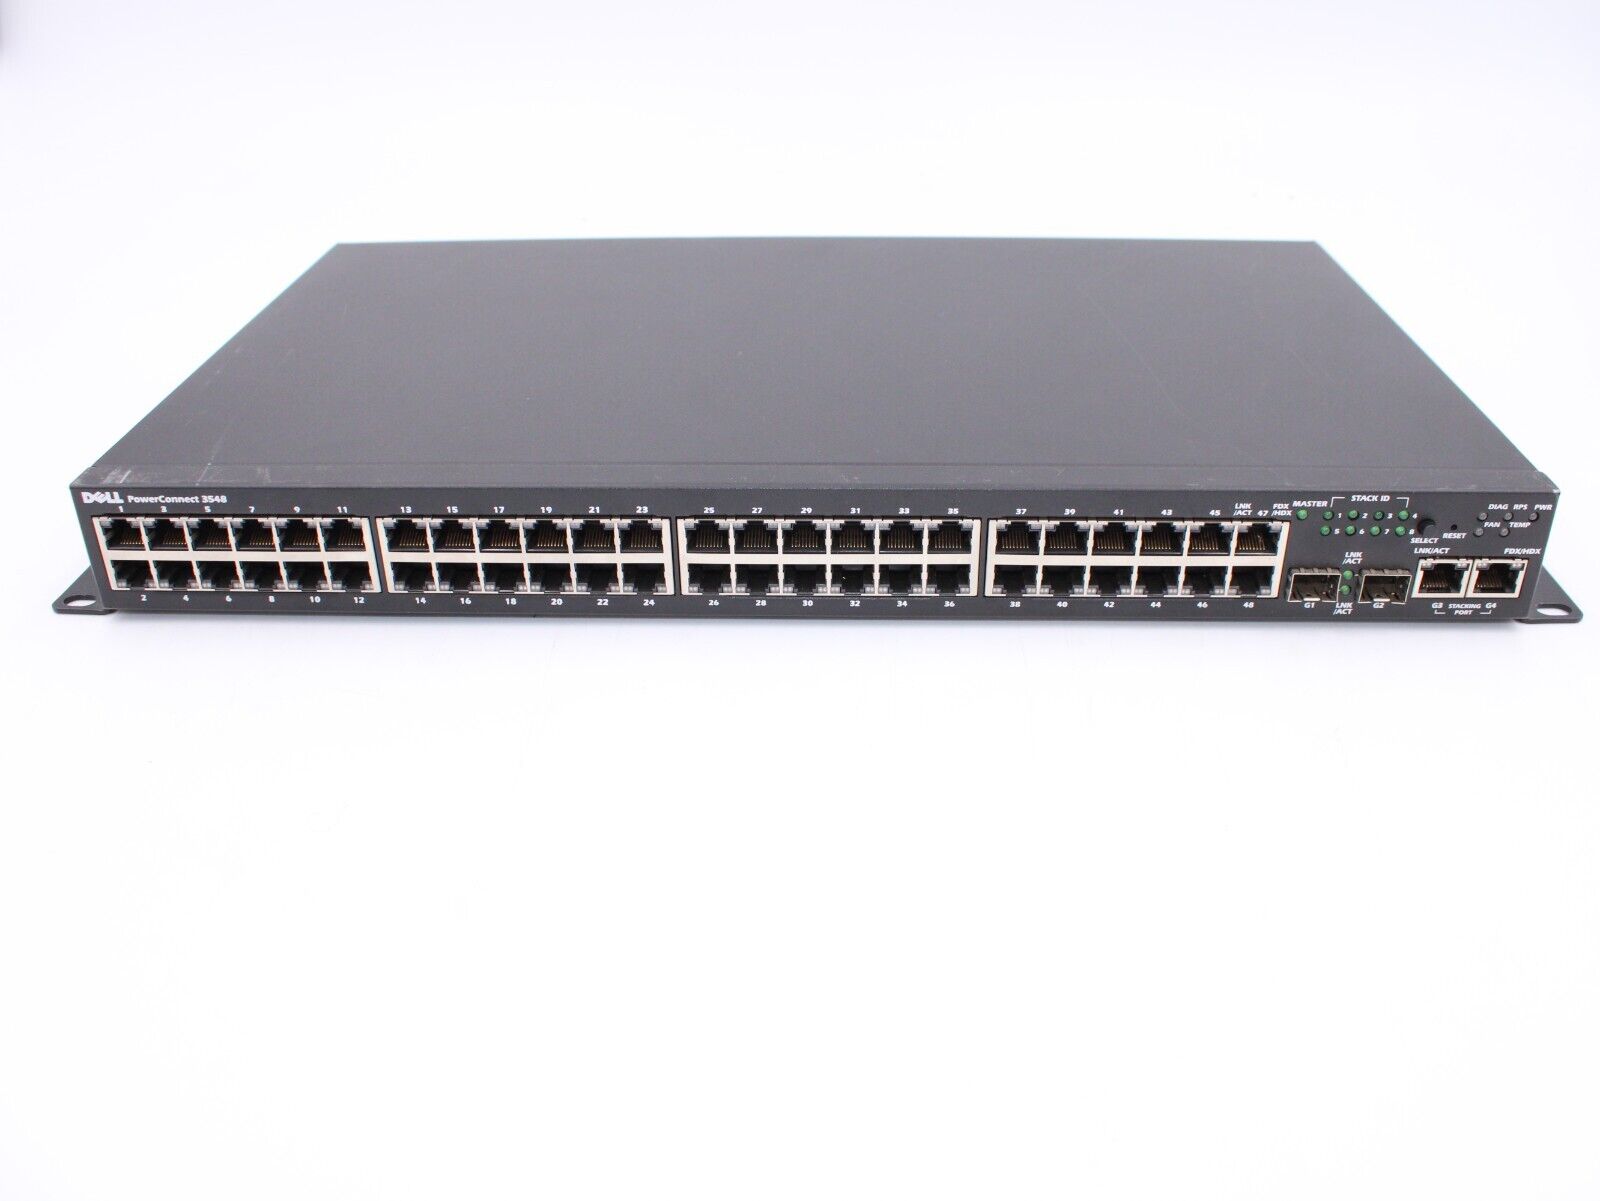 Dell PowerConnect 3548 48 Port 10/100 Rack Mountable Fast Ethernet Switch